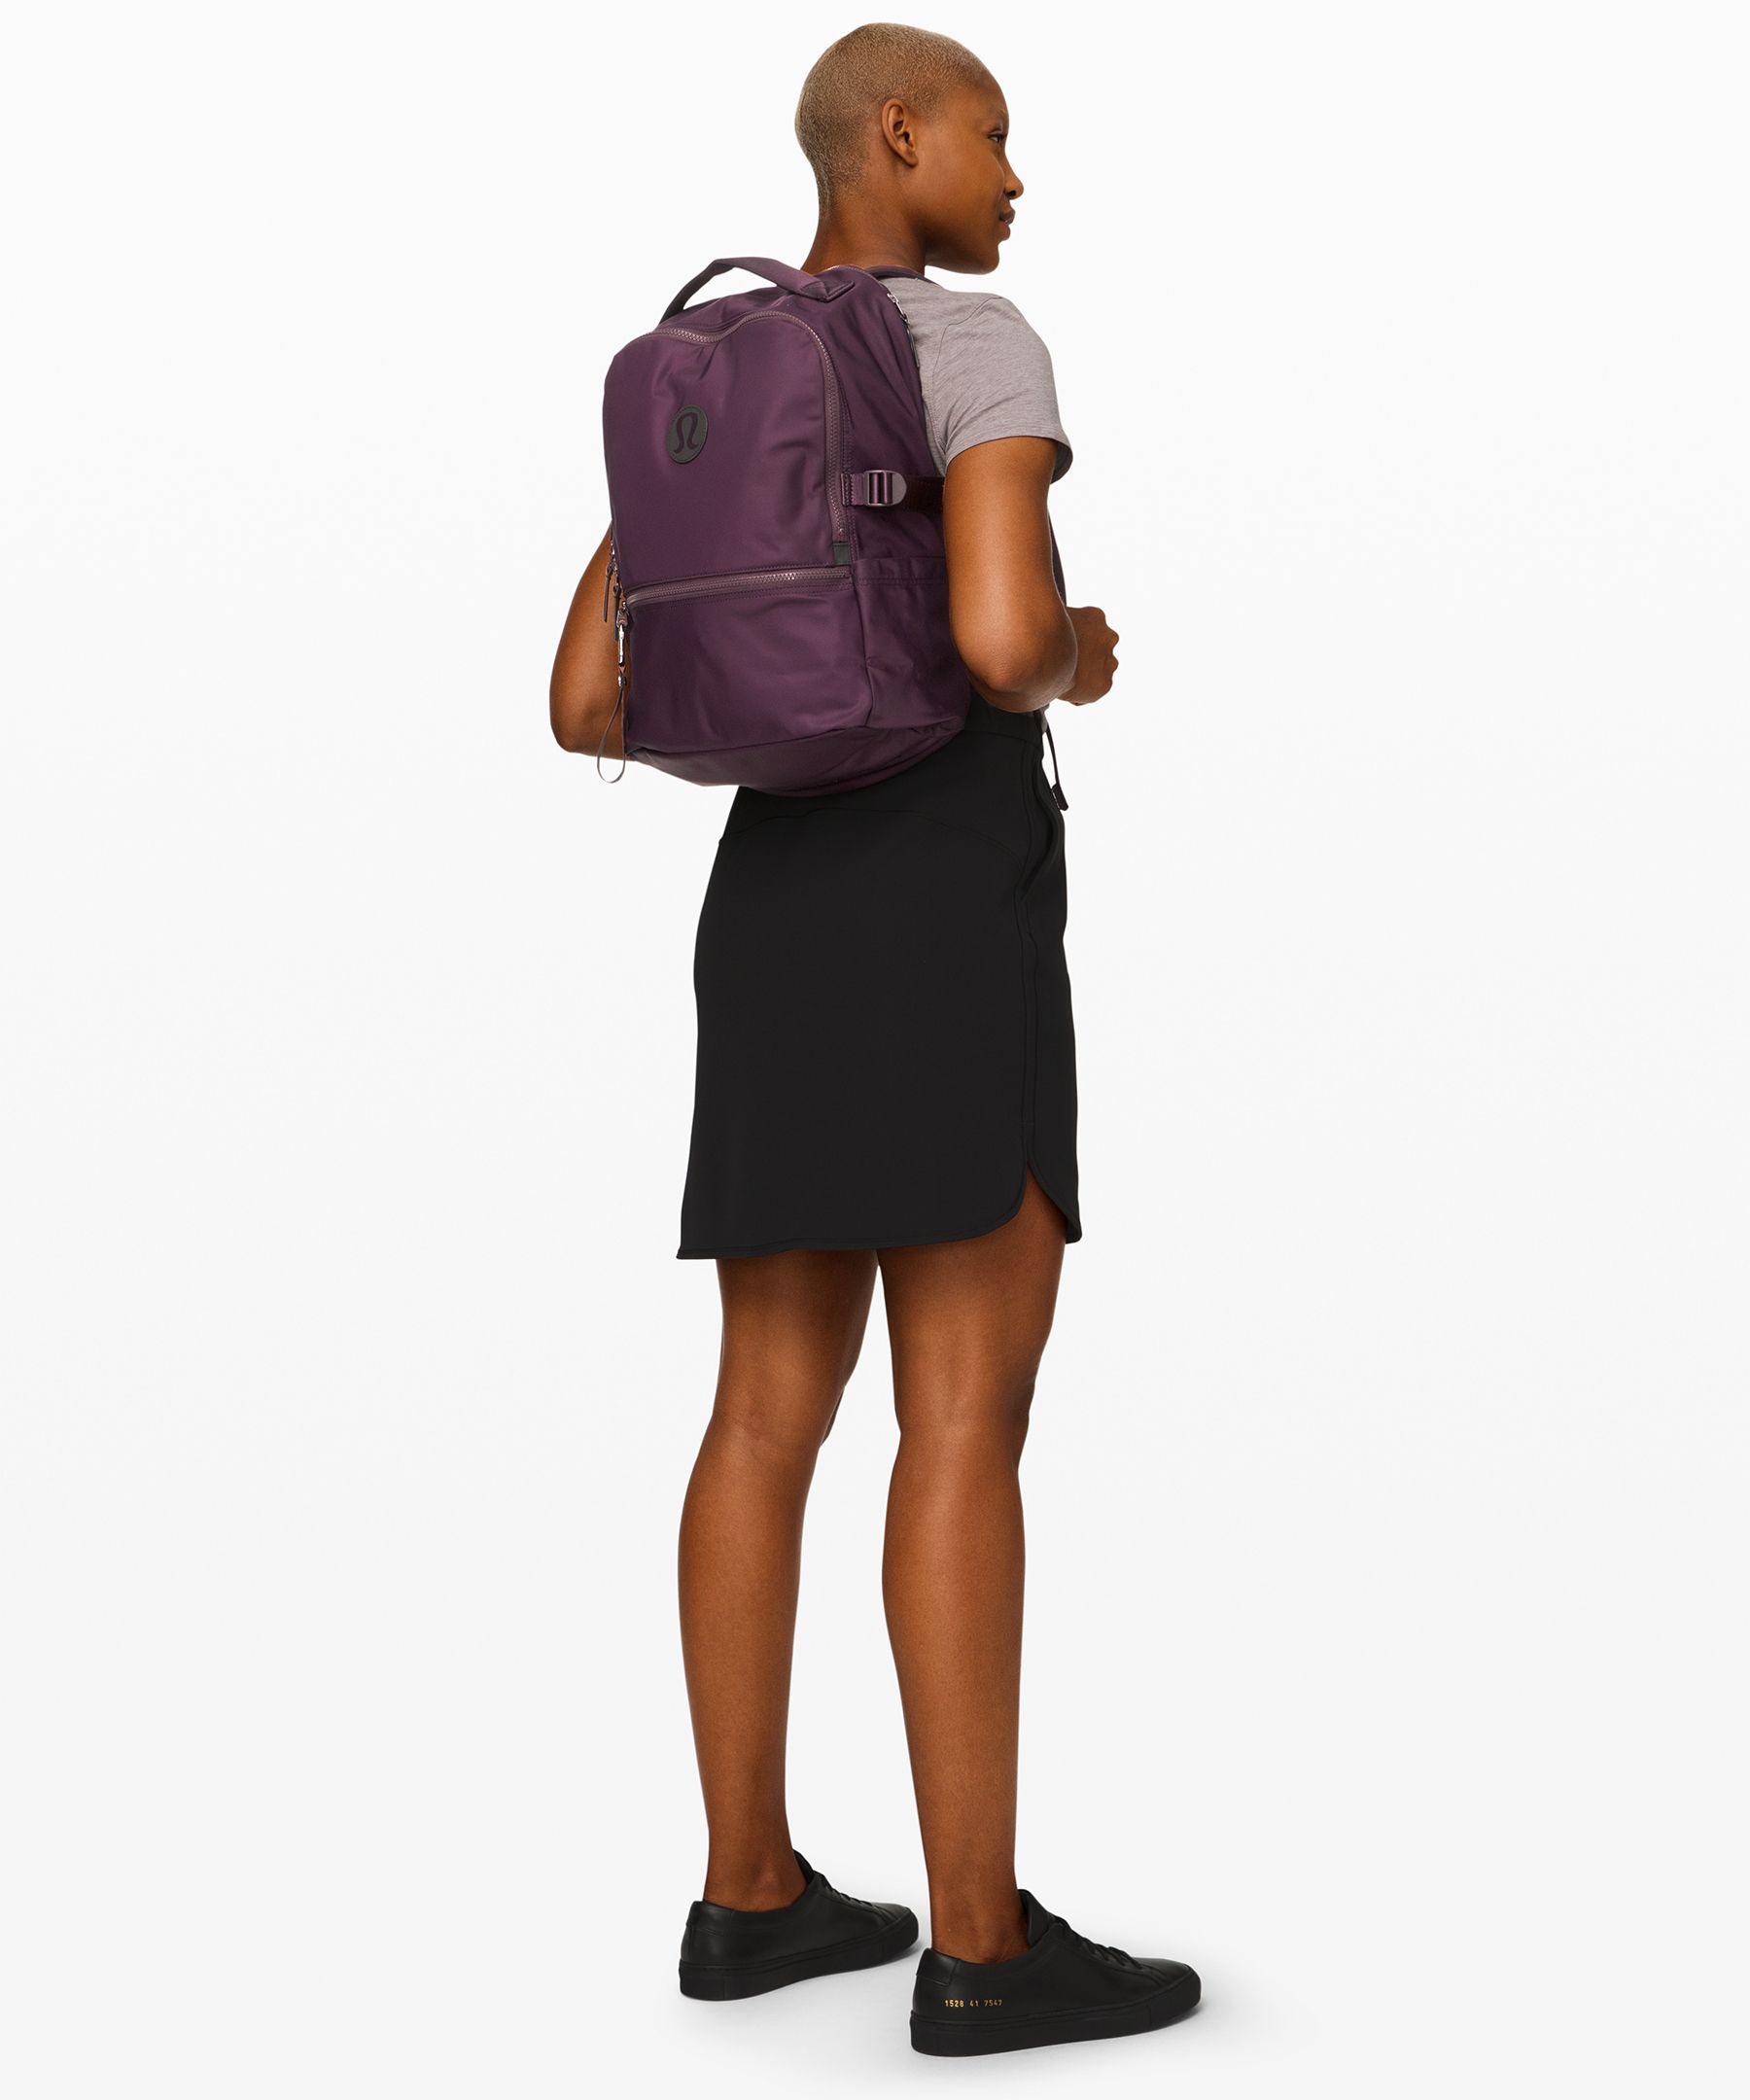 New Crew Backpack *22L | Women's Bags 